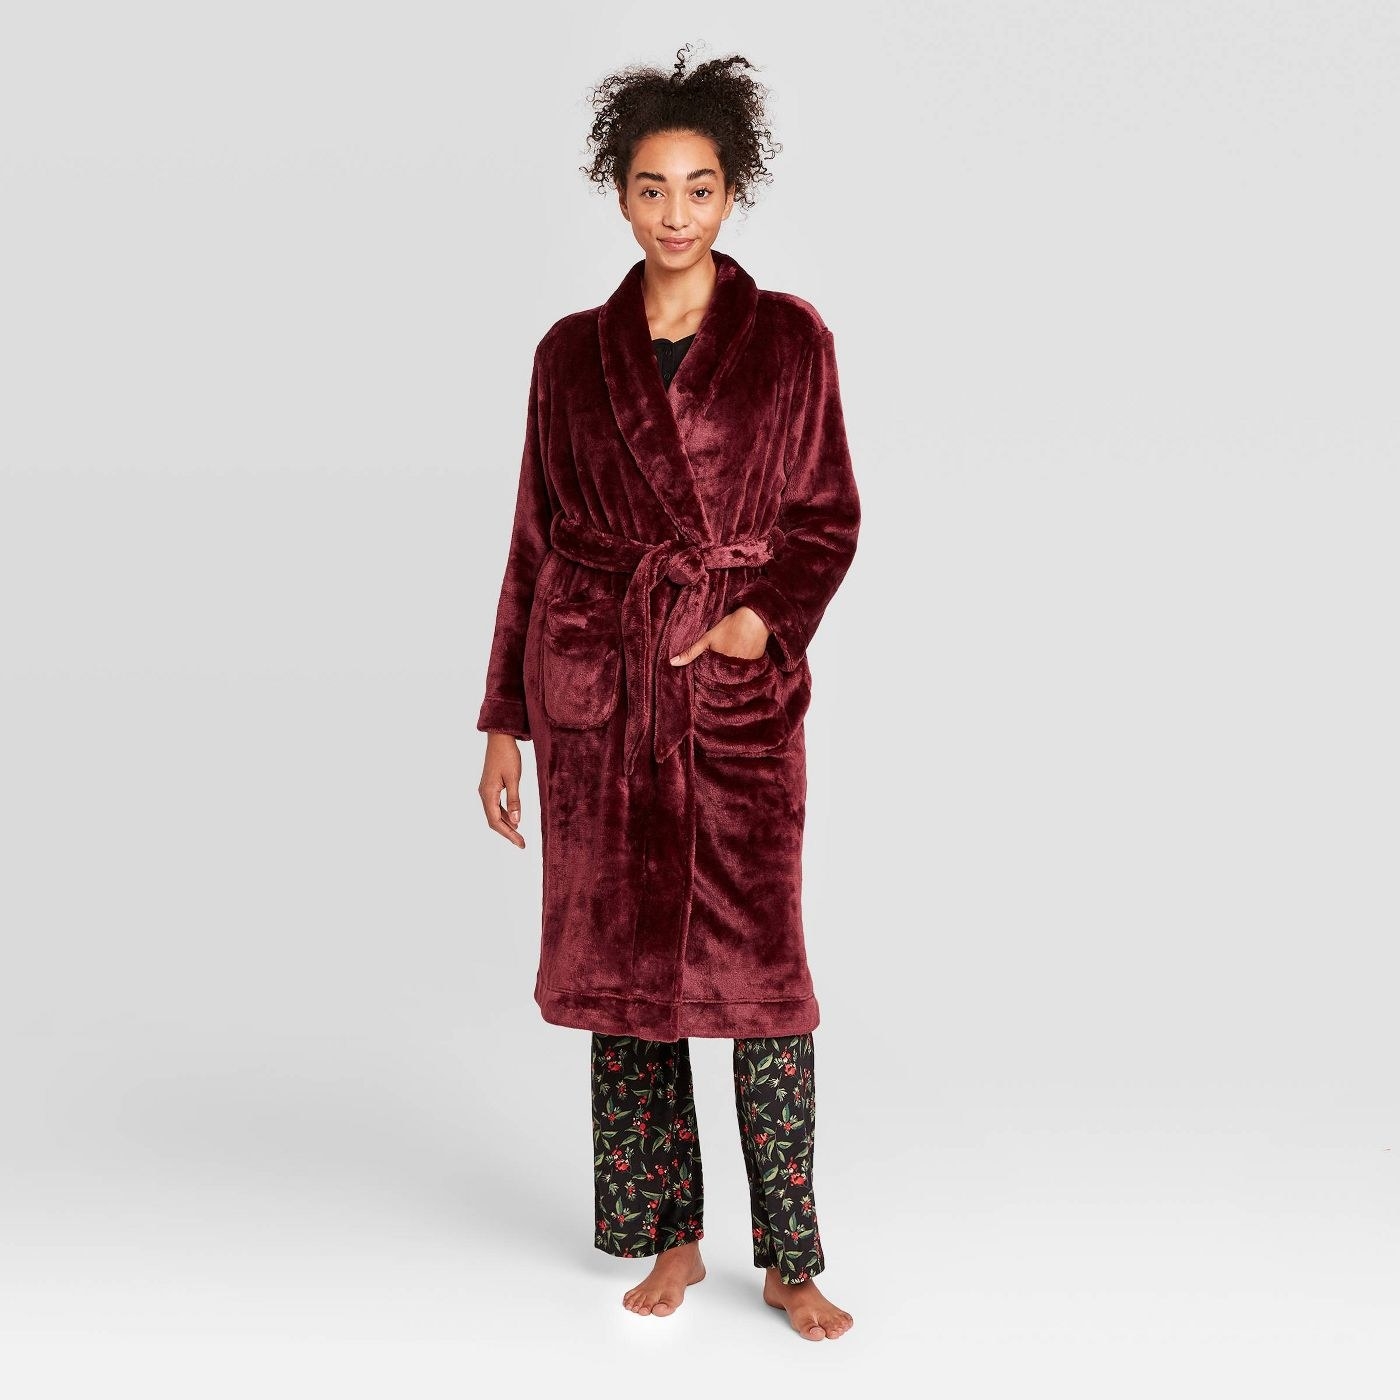 The plush robe warn by a model in a deep red